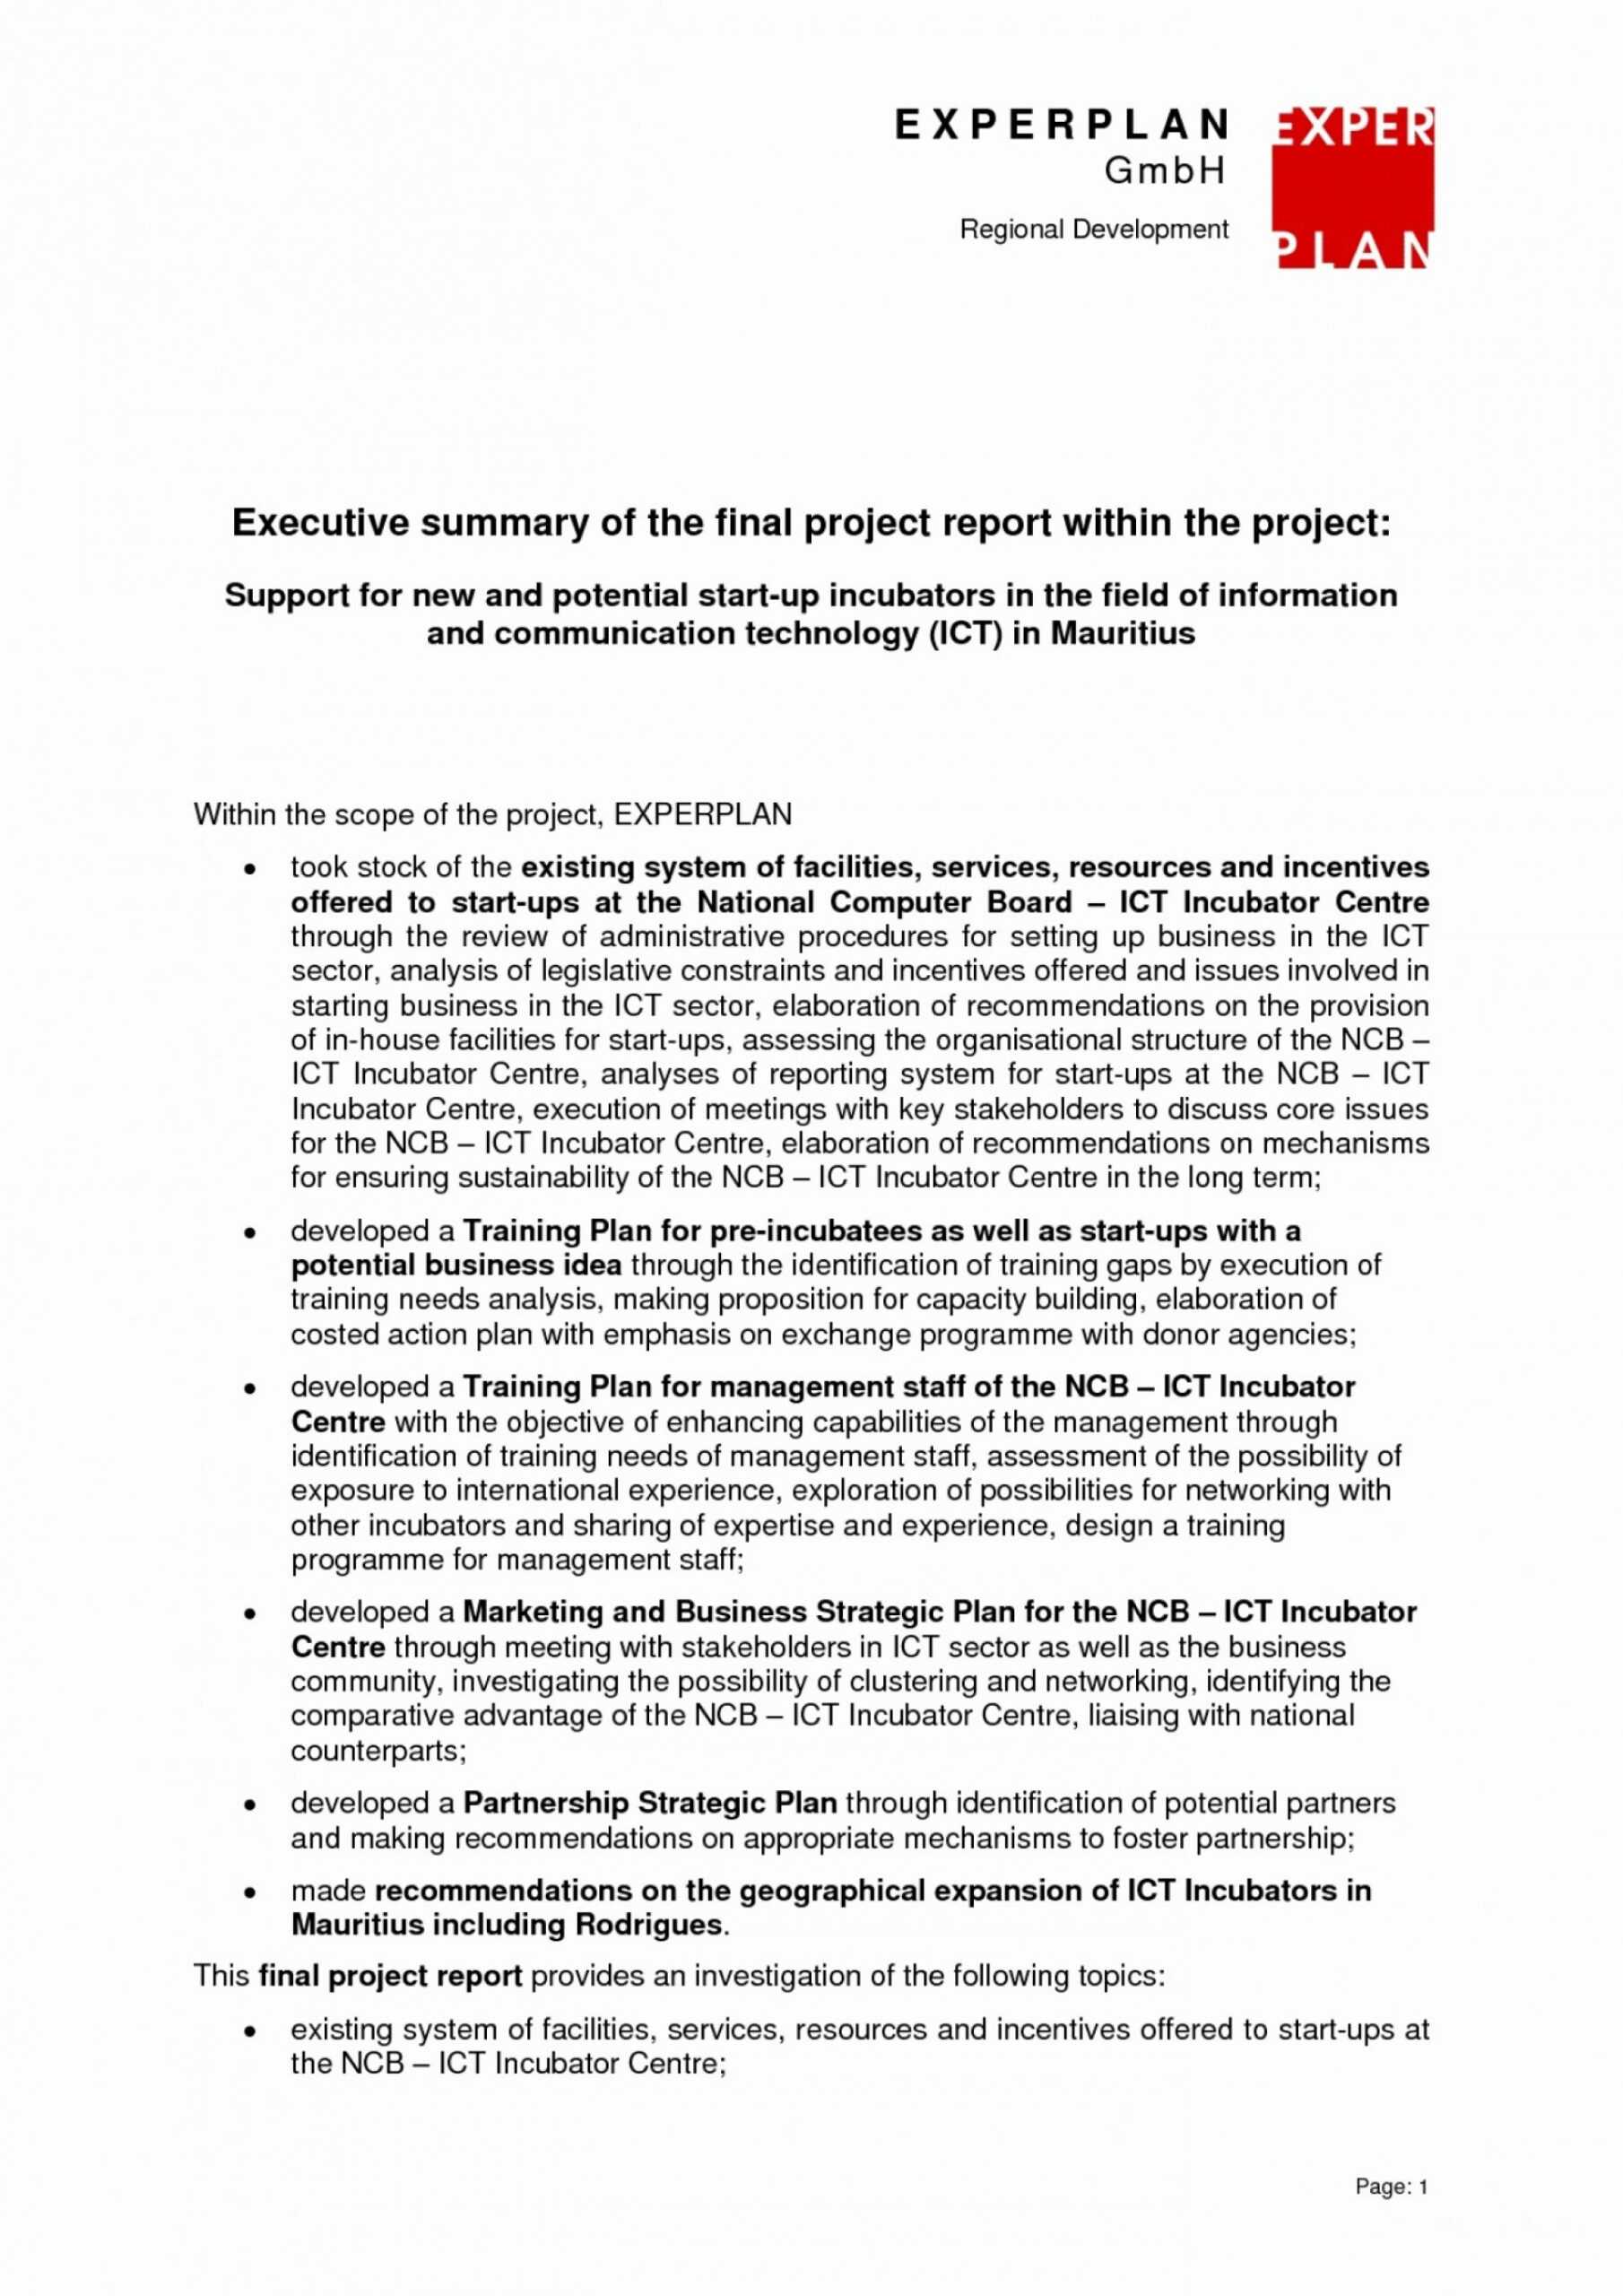 008 Project Management Executive Summary Report Template With Regard To Executive Summary Report Template